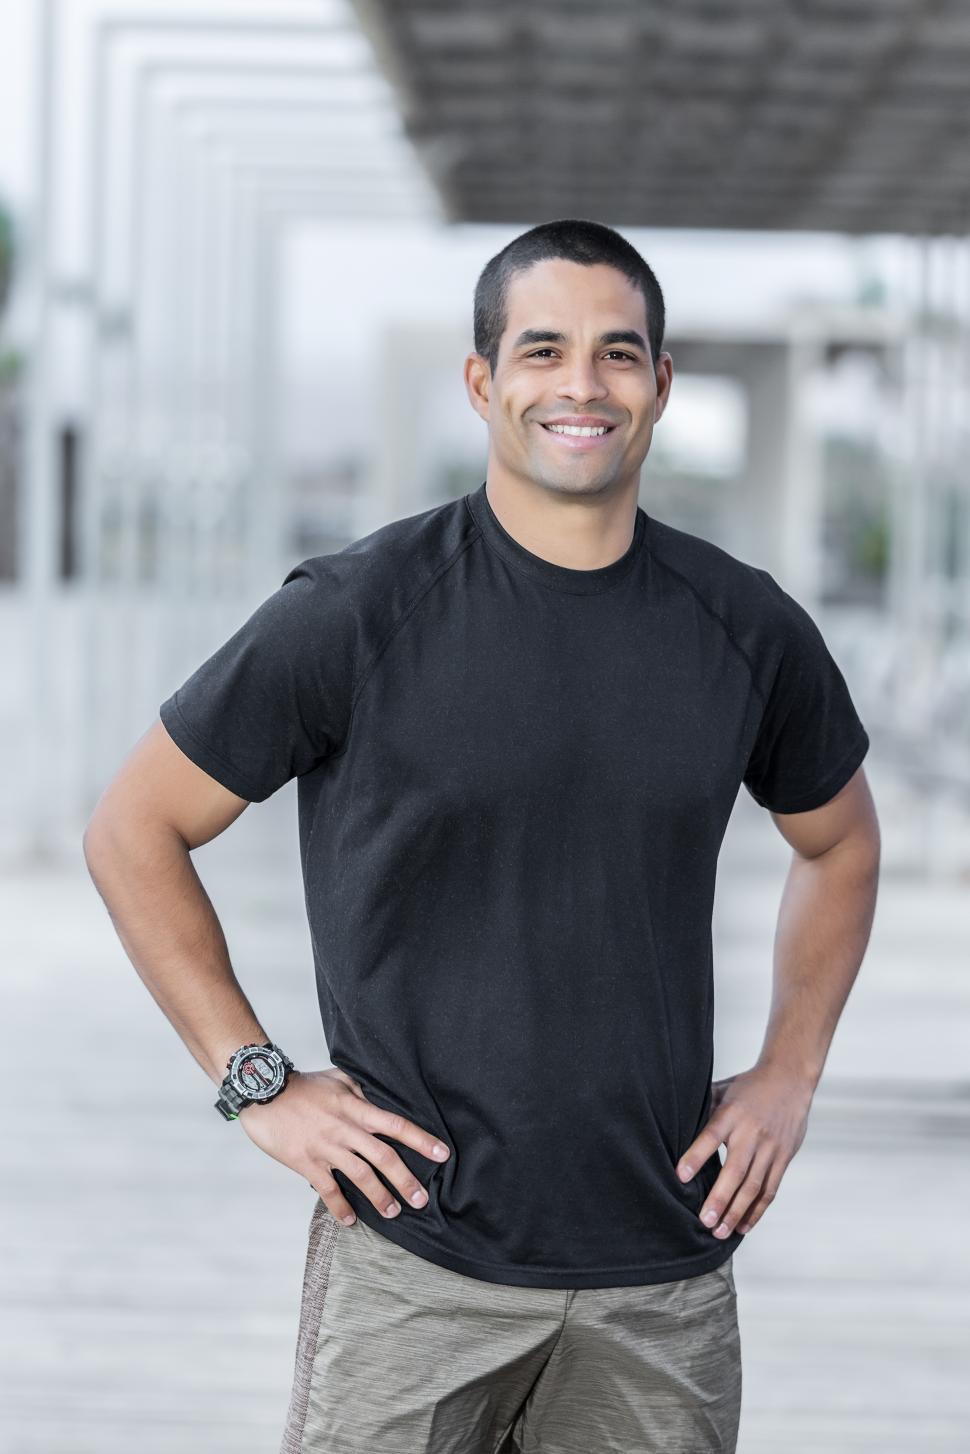 Download Free Stock Photo of Handsome personal trainer with friendly smile 